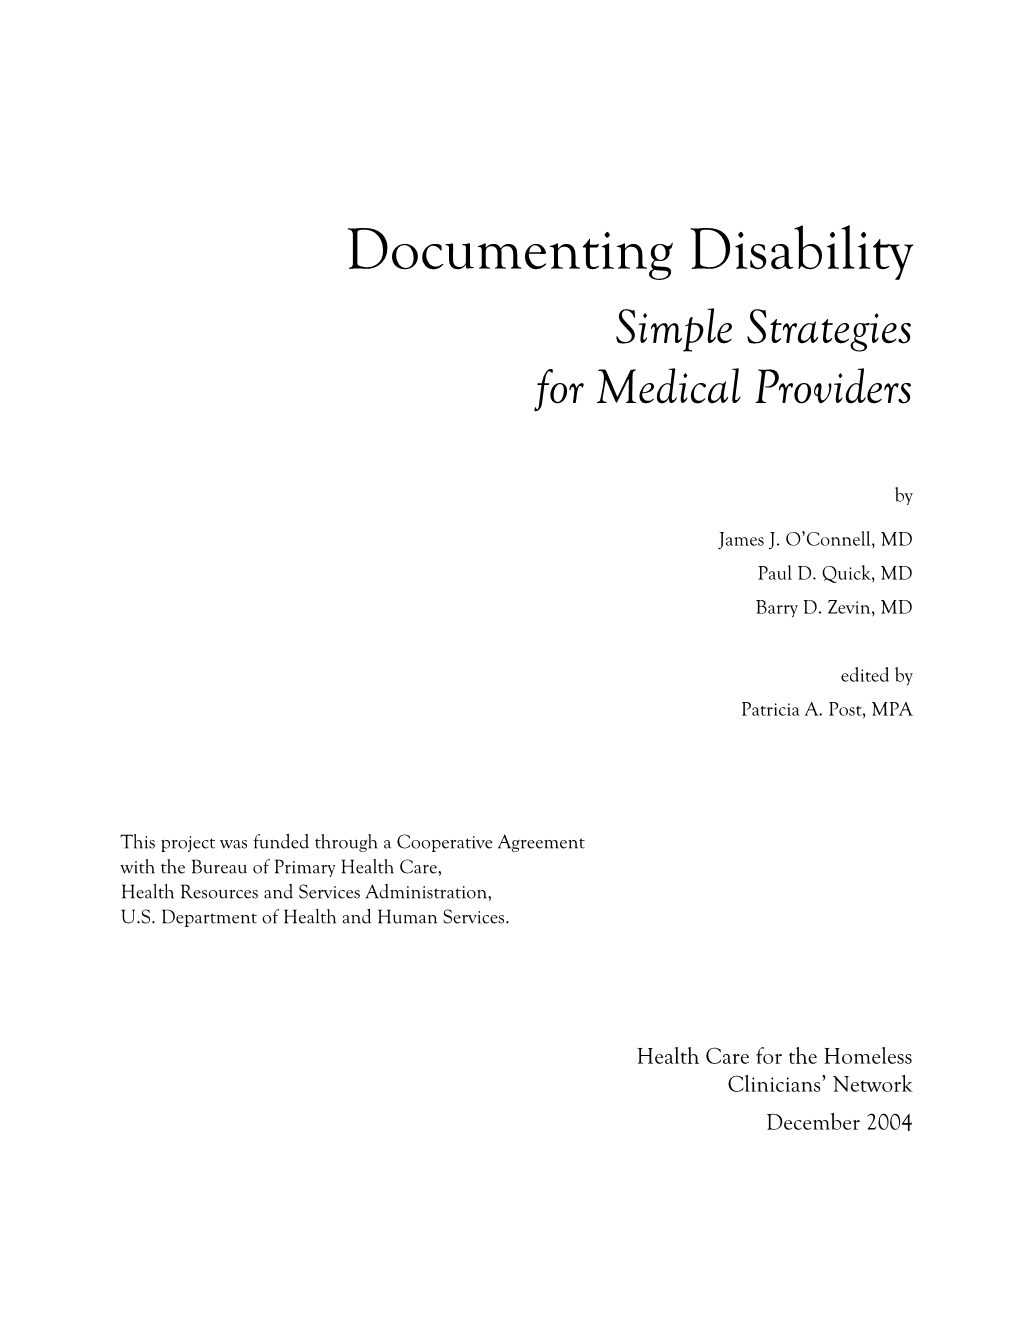 Determining Disability: Simple Strategies for Clinicians by James J